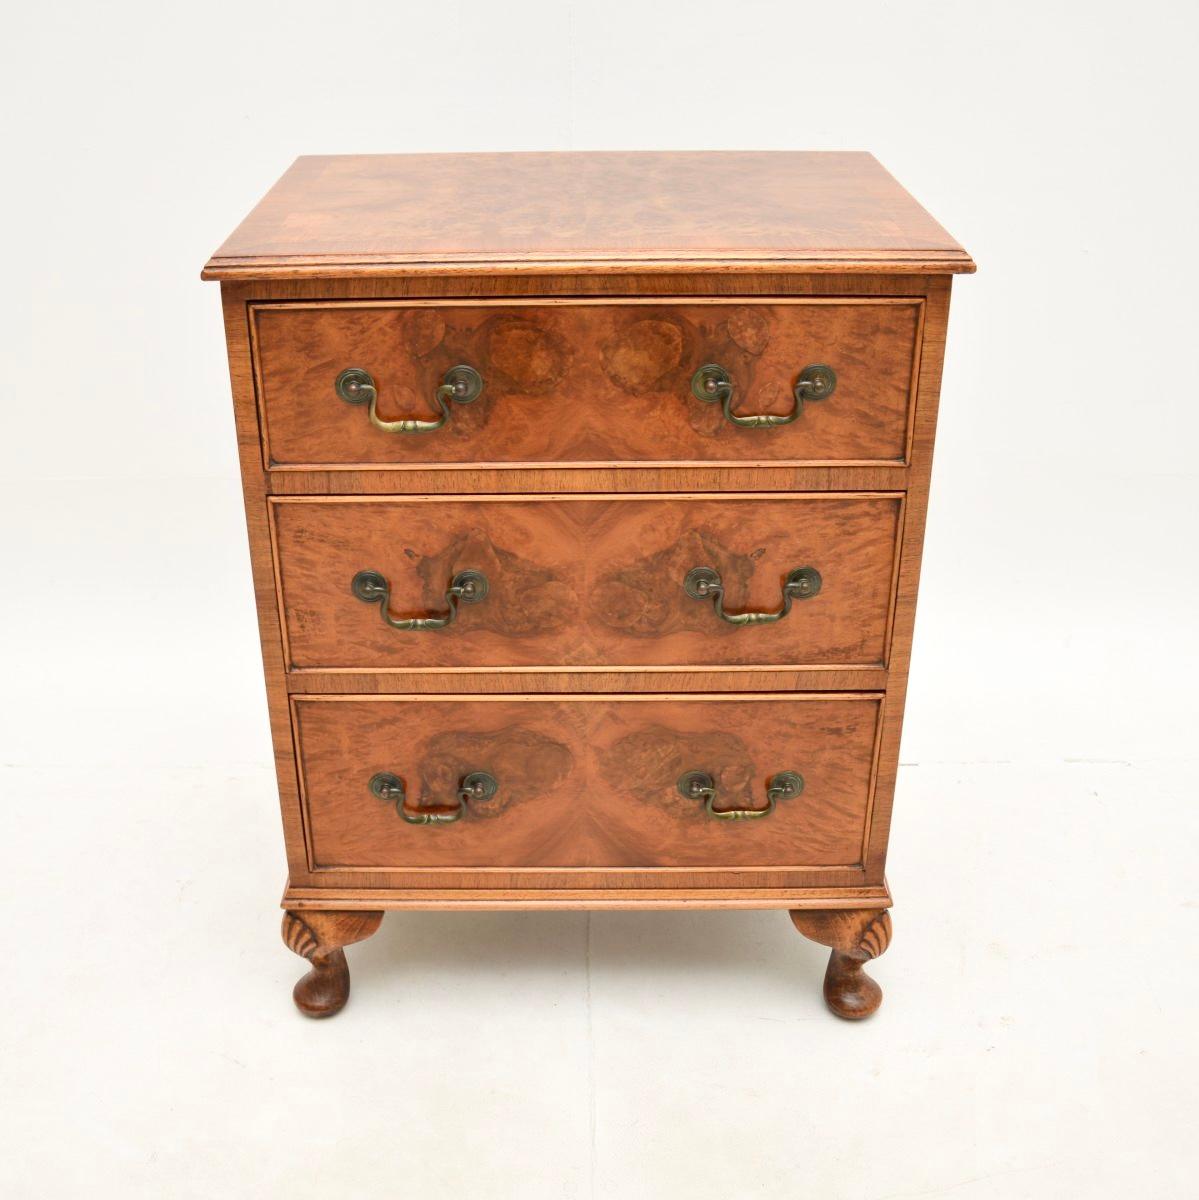 A lovely antique burr walnut chest of drawers. This was made in England, it dates from around the 1930’s.

It is of superb quality and is a useful size, low, compact yet offering lots of storage space. This has gorgeous burr walnut grain patterns,